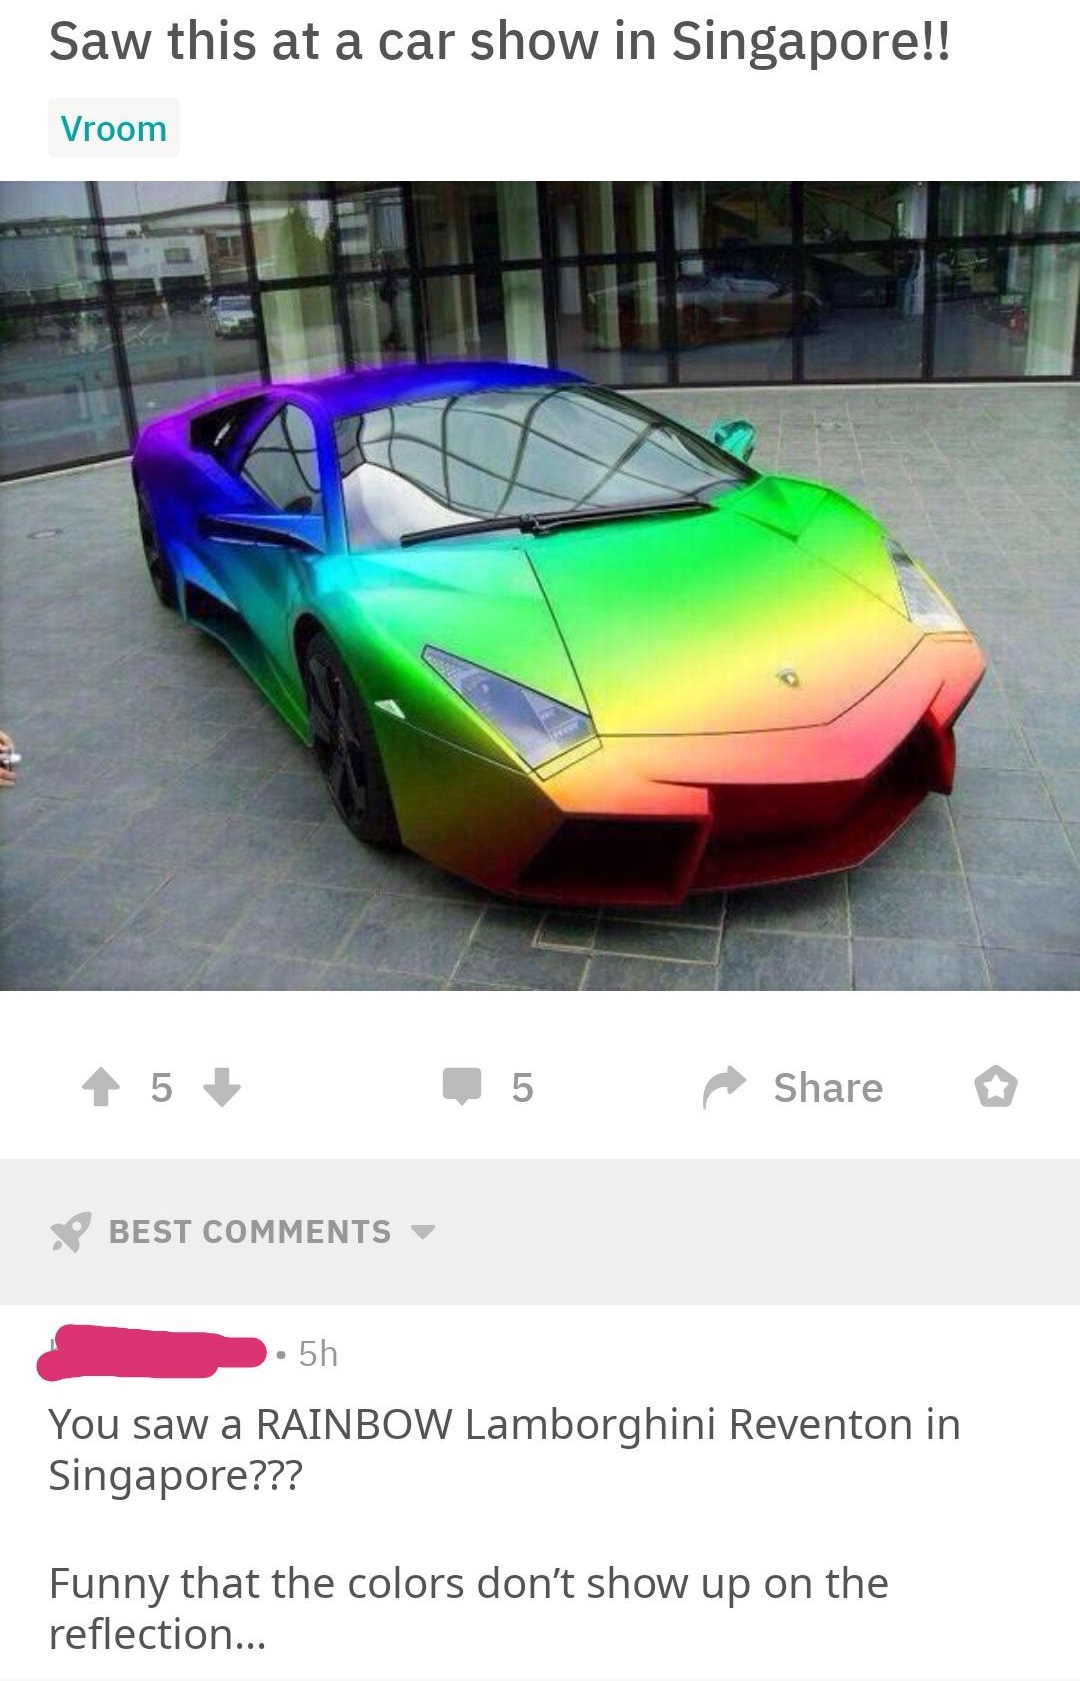 quit your bullshit - color changing lamborghini - Saw this at a car show in Singapore!!  You saw a Rainbow Lamborghini Reventon in Singapore??? Funny that the colors don't show up on the reflection